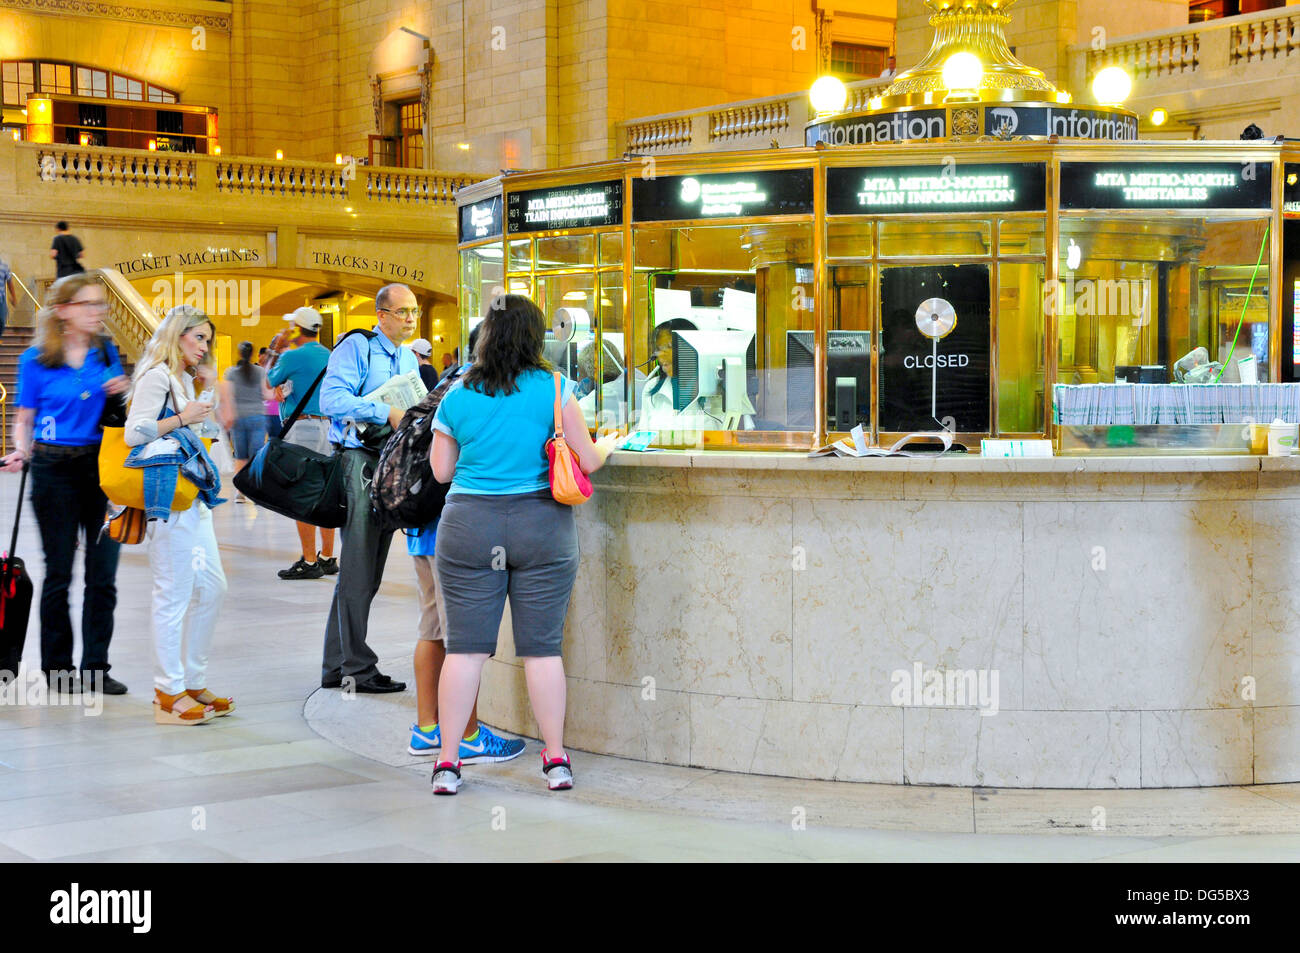 Grand Hall of Grand Central Terminal, Information Booth, Midtown Manhattan, New York City, USA Stock Photo